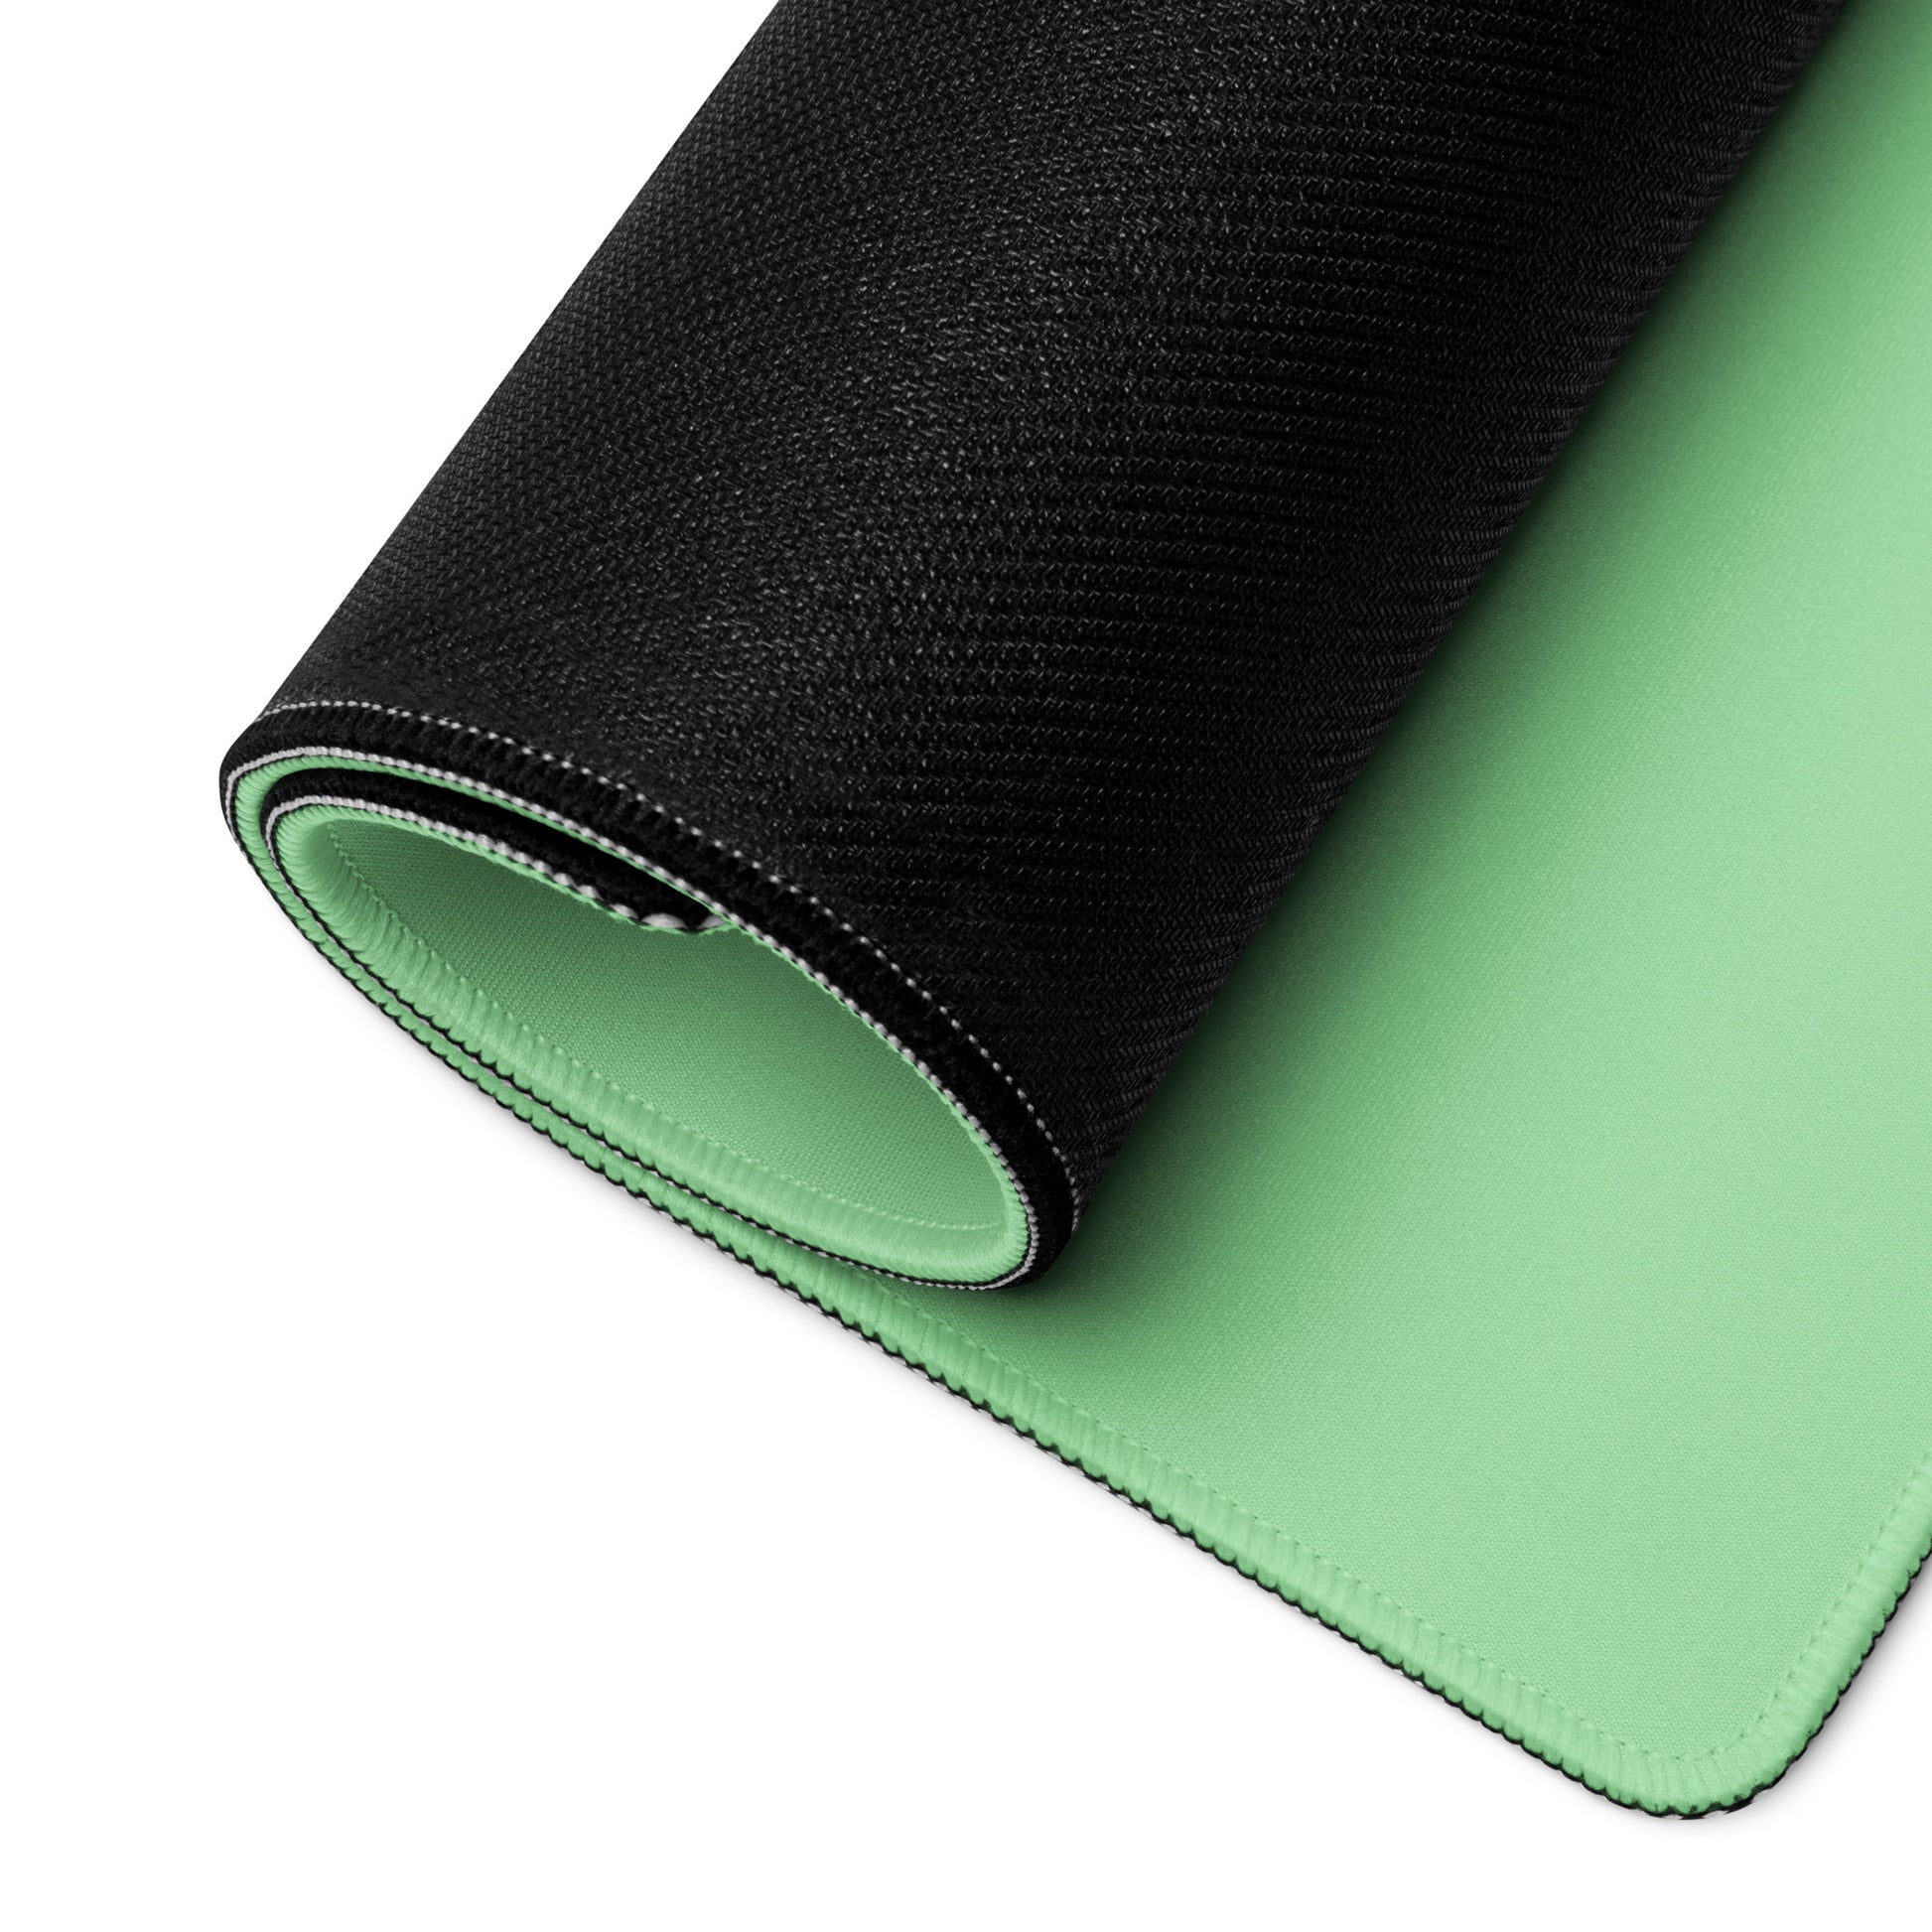 A 36" x 18" desk pad with a cute tree on it rolled up. Green in color.